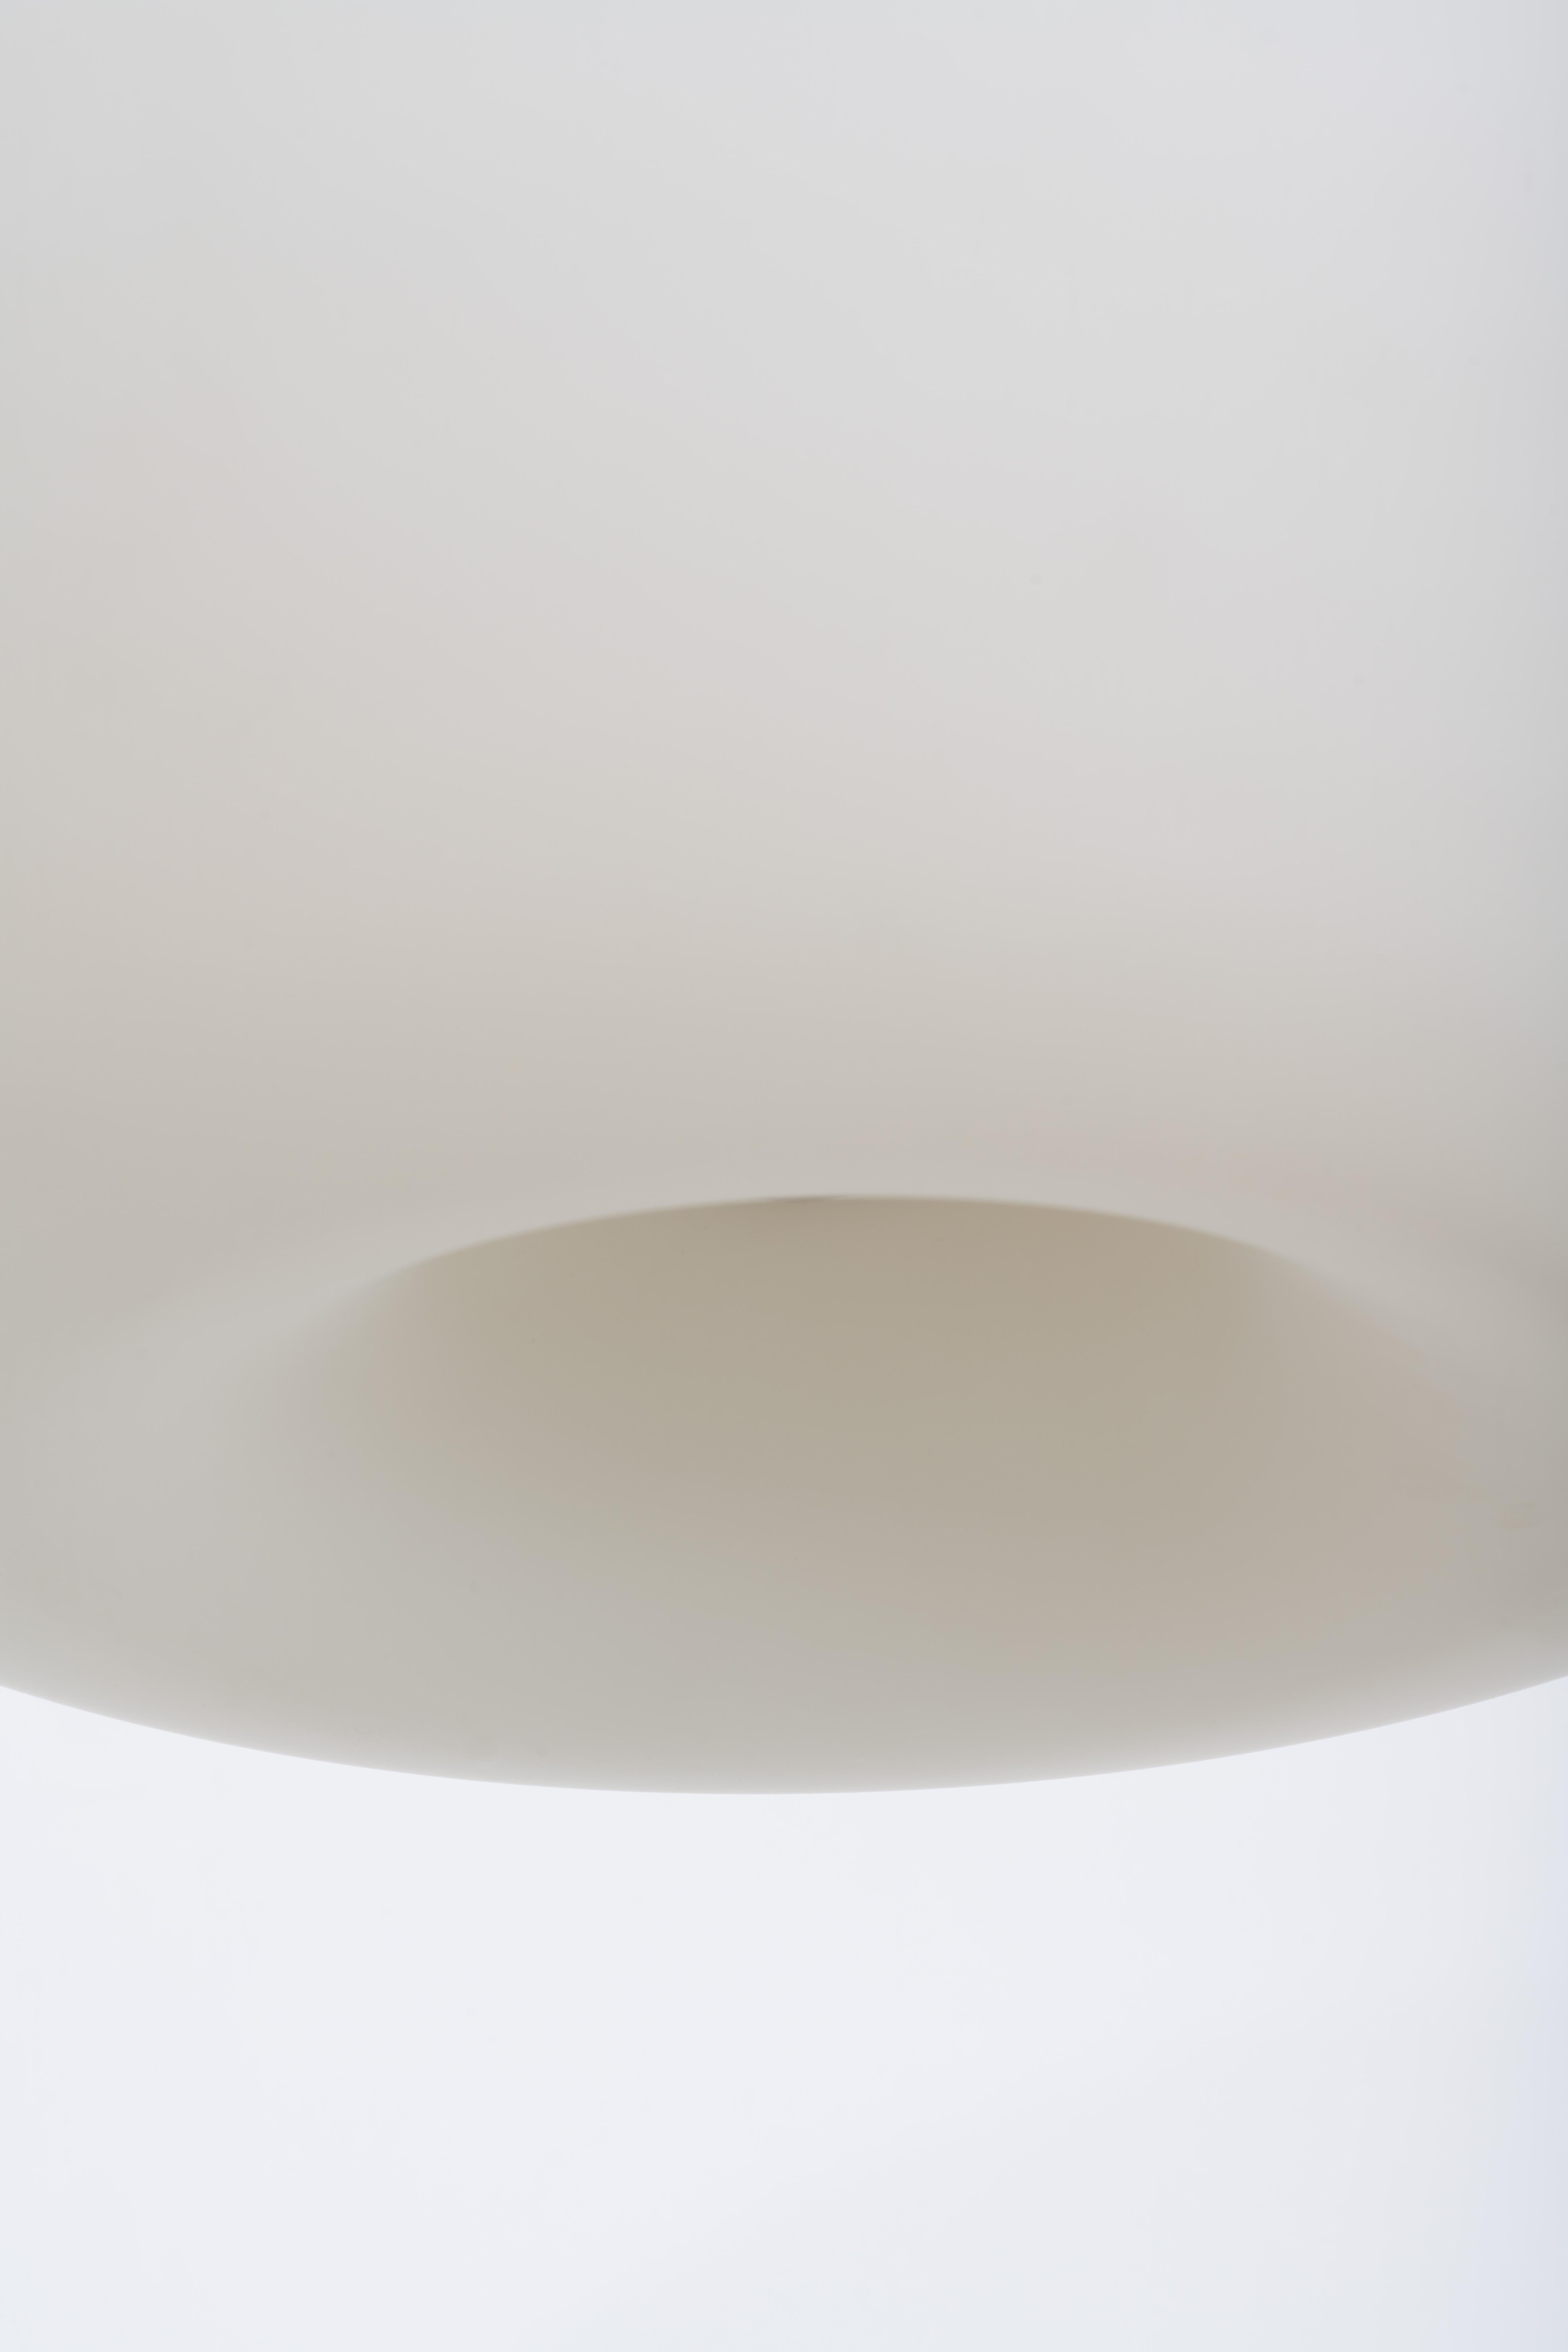 1950 Lisa Johansson Pape - Ceiling lamp brass, opaline glass In Fair Condition For Sale In Milan, IT